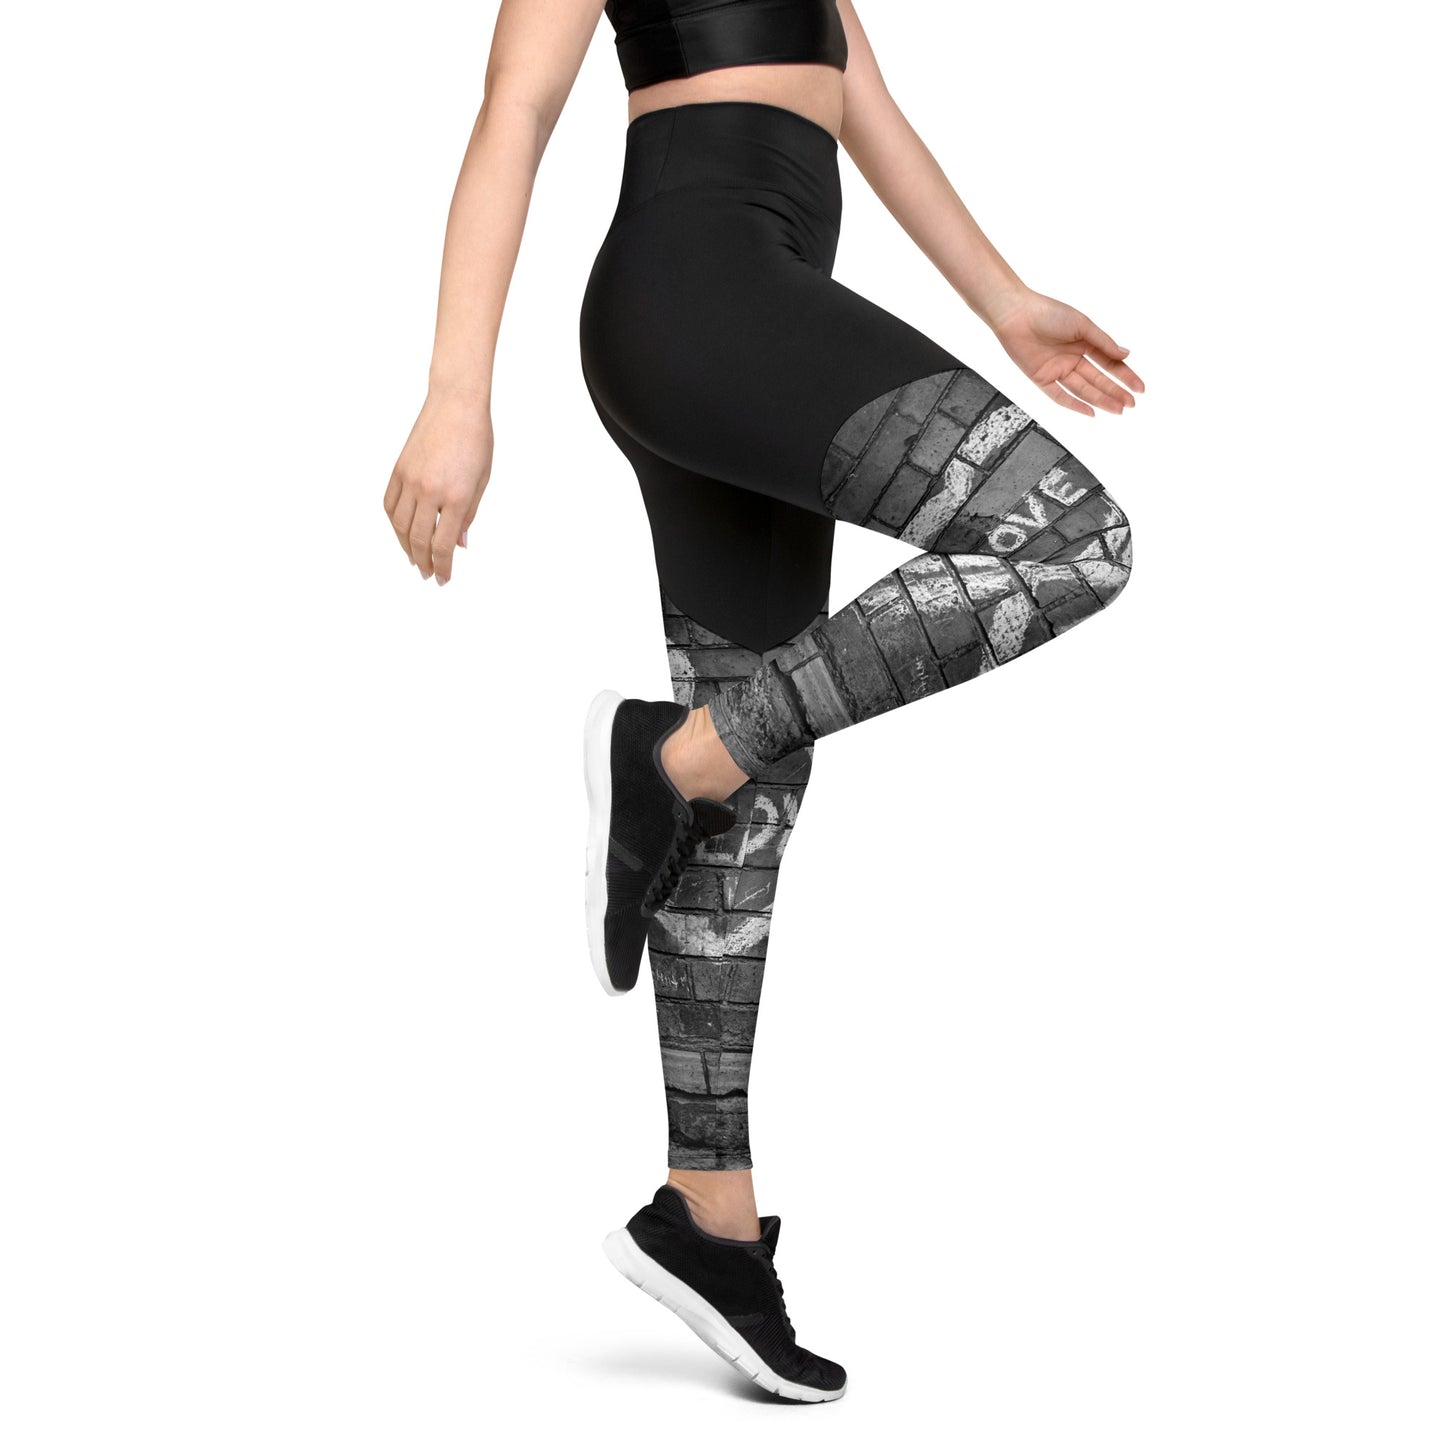 Protected By Love Sports Leggings